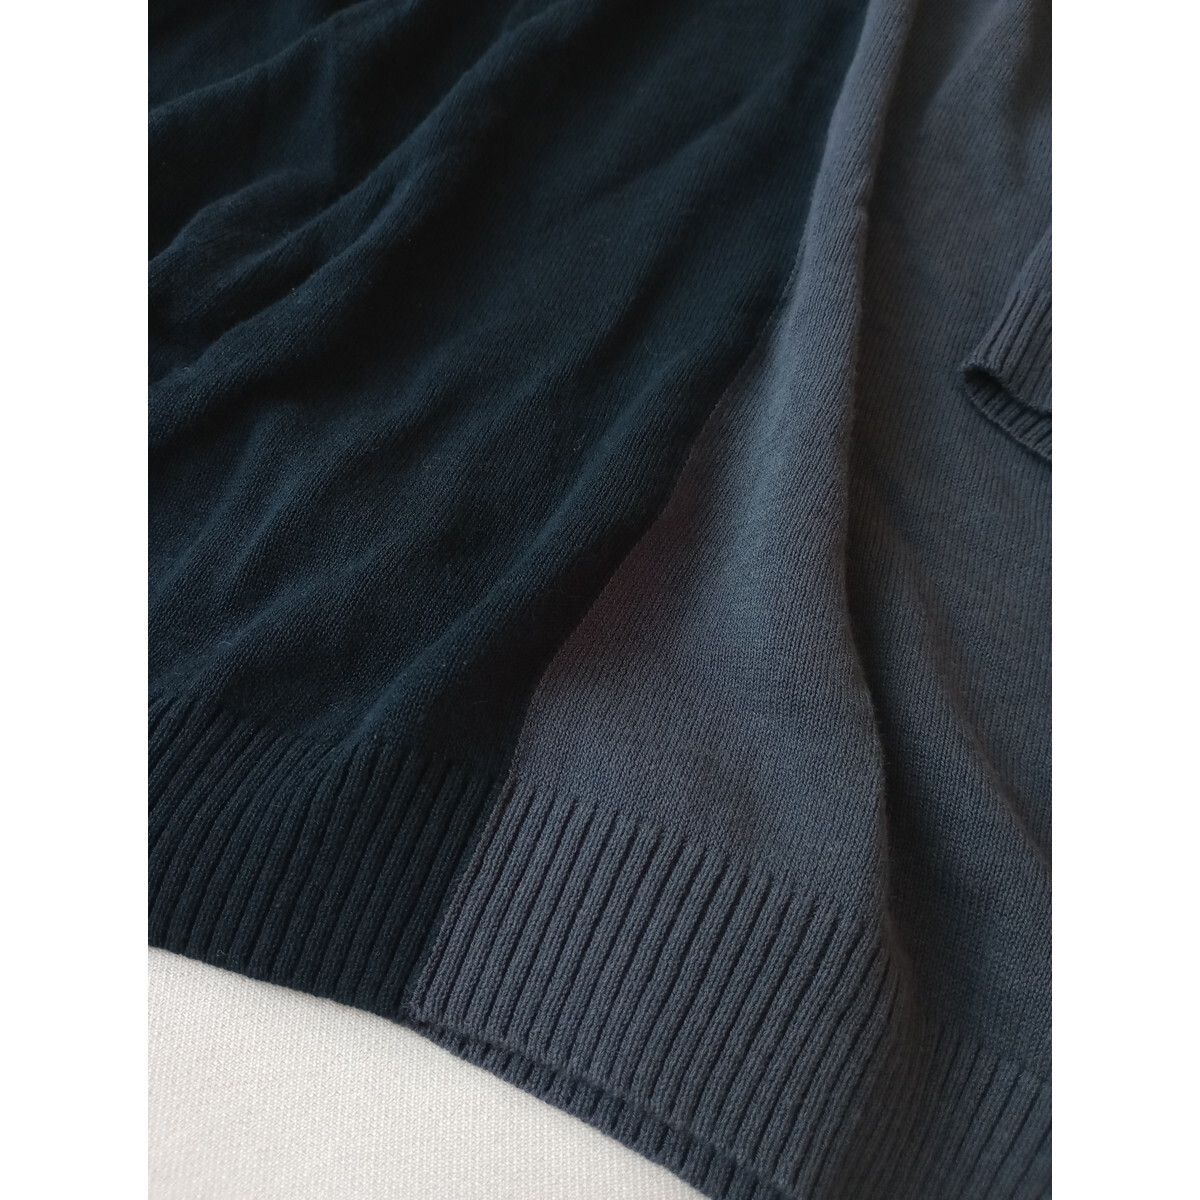 Agaa-ga[ simple also presence . exist one put on ] cotton cotton . color scheme bai color knitted pull over black gray (10Y+0426)